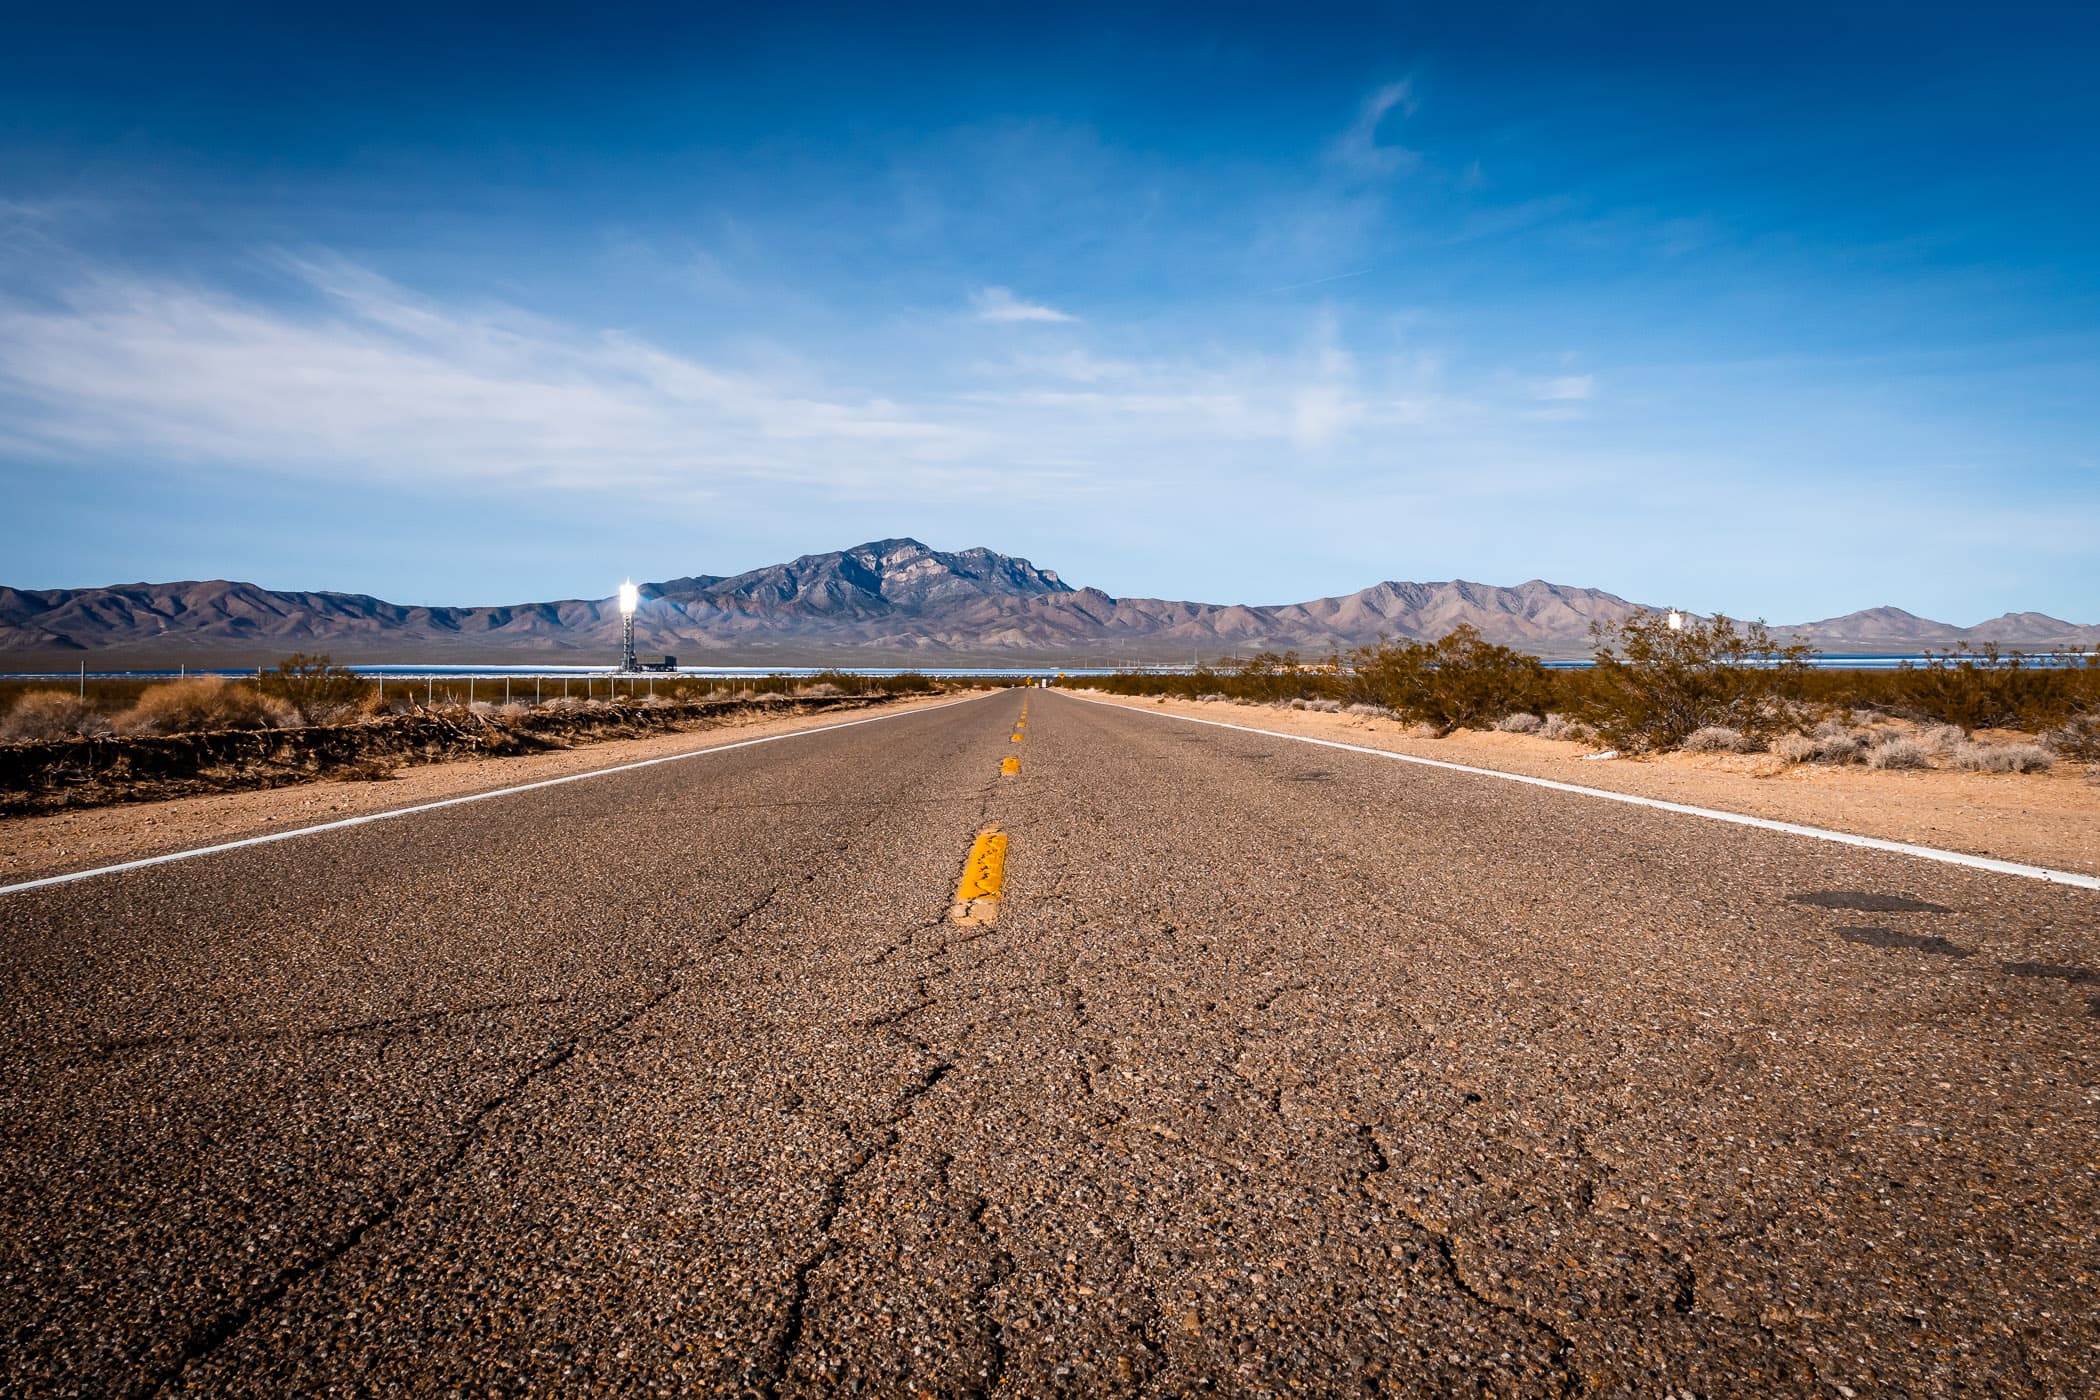 A lonely road leads to the Ivanpah Solar Power Facility in the California desert near the Nevada border.